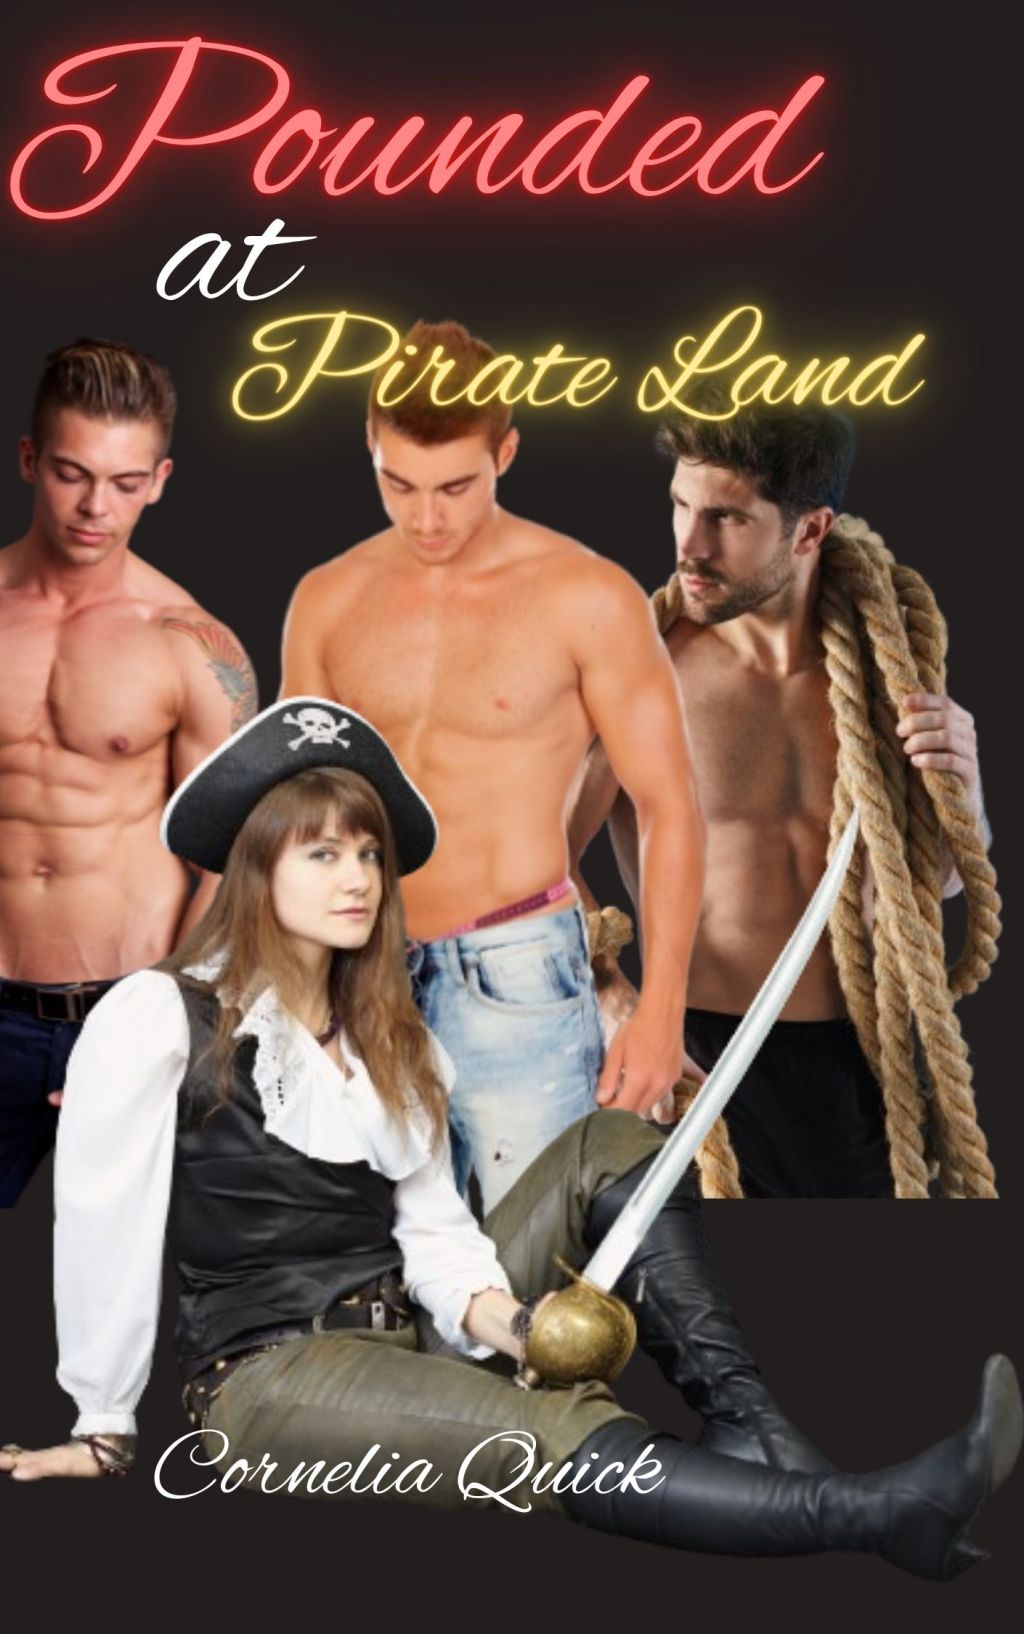 Pounded at Pirate Land – FREE until November 30!